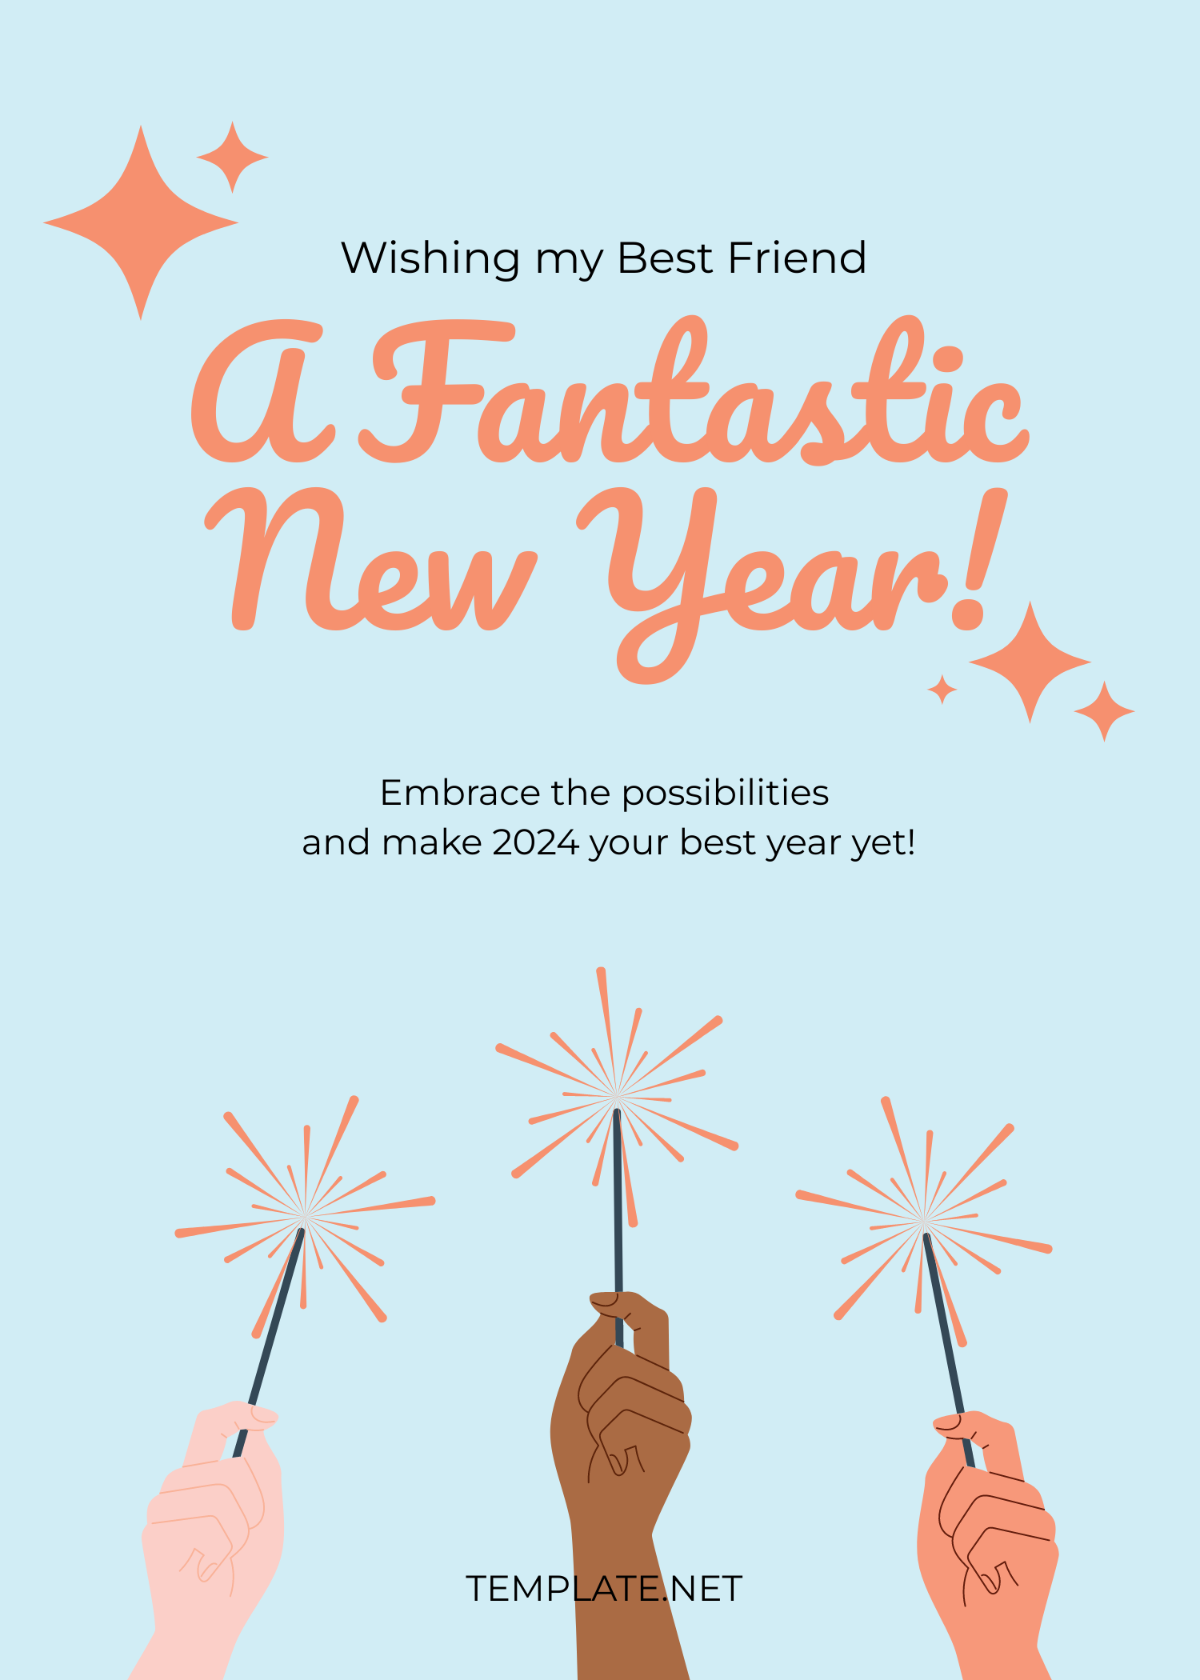 New Year Greeting For Friends Template